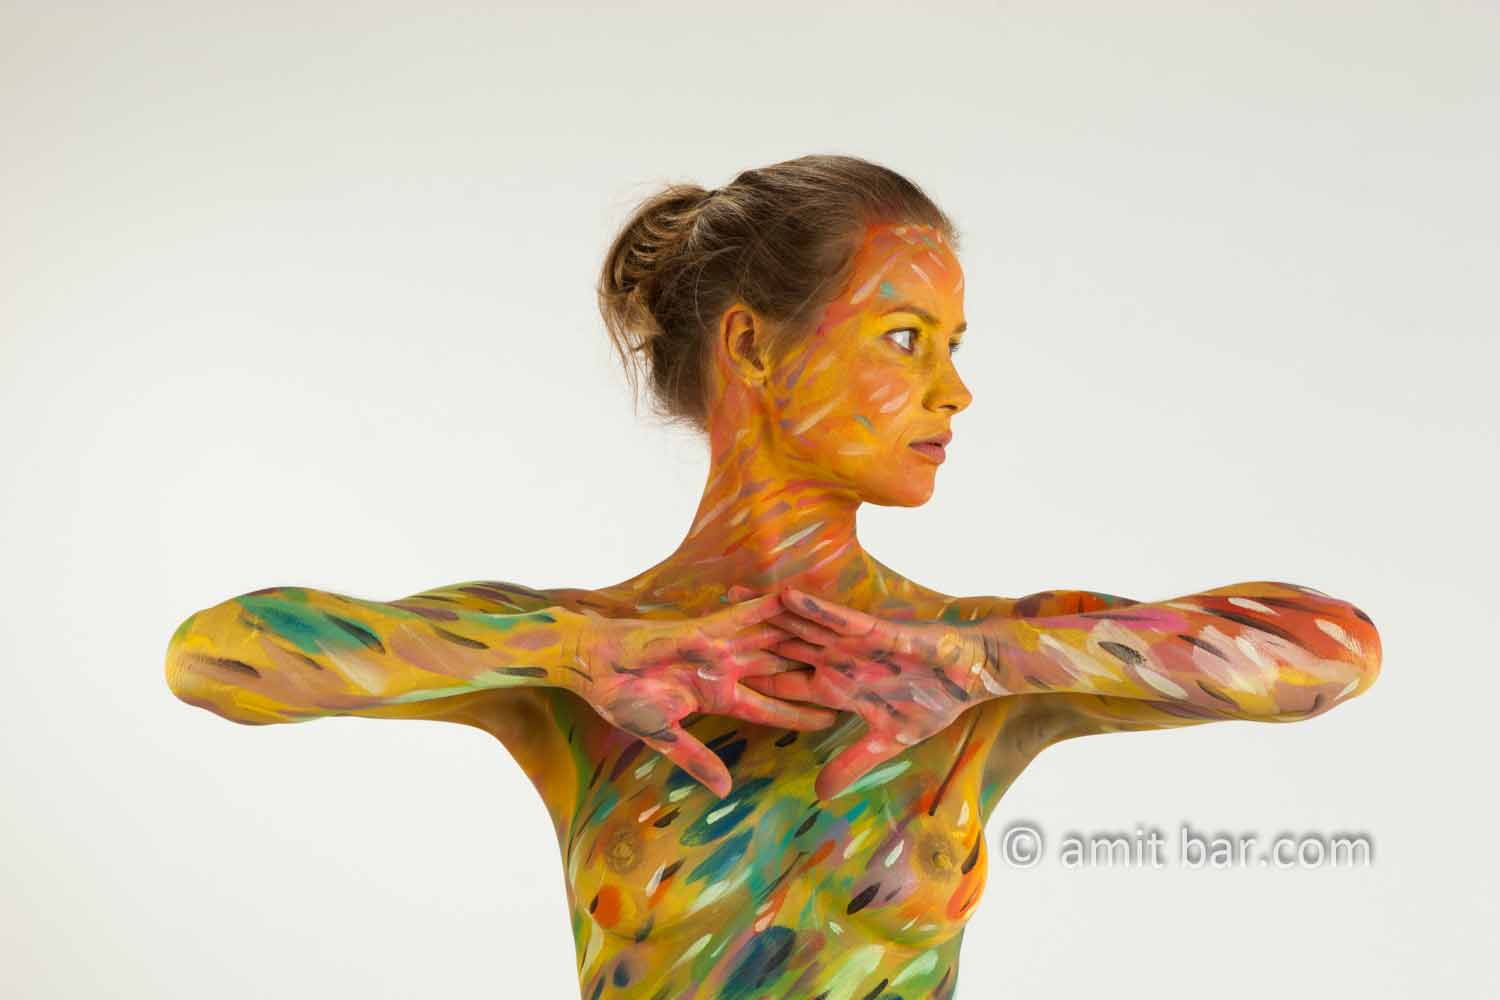 Variations IV: body-painted model in colored stripes